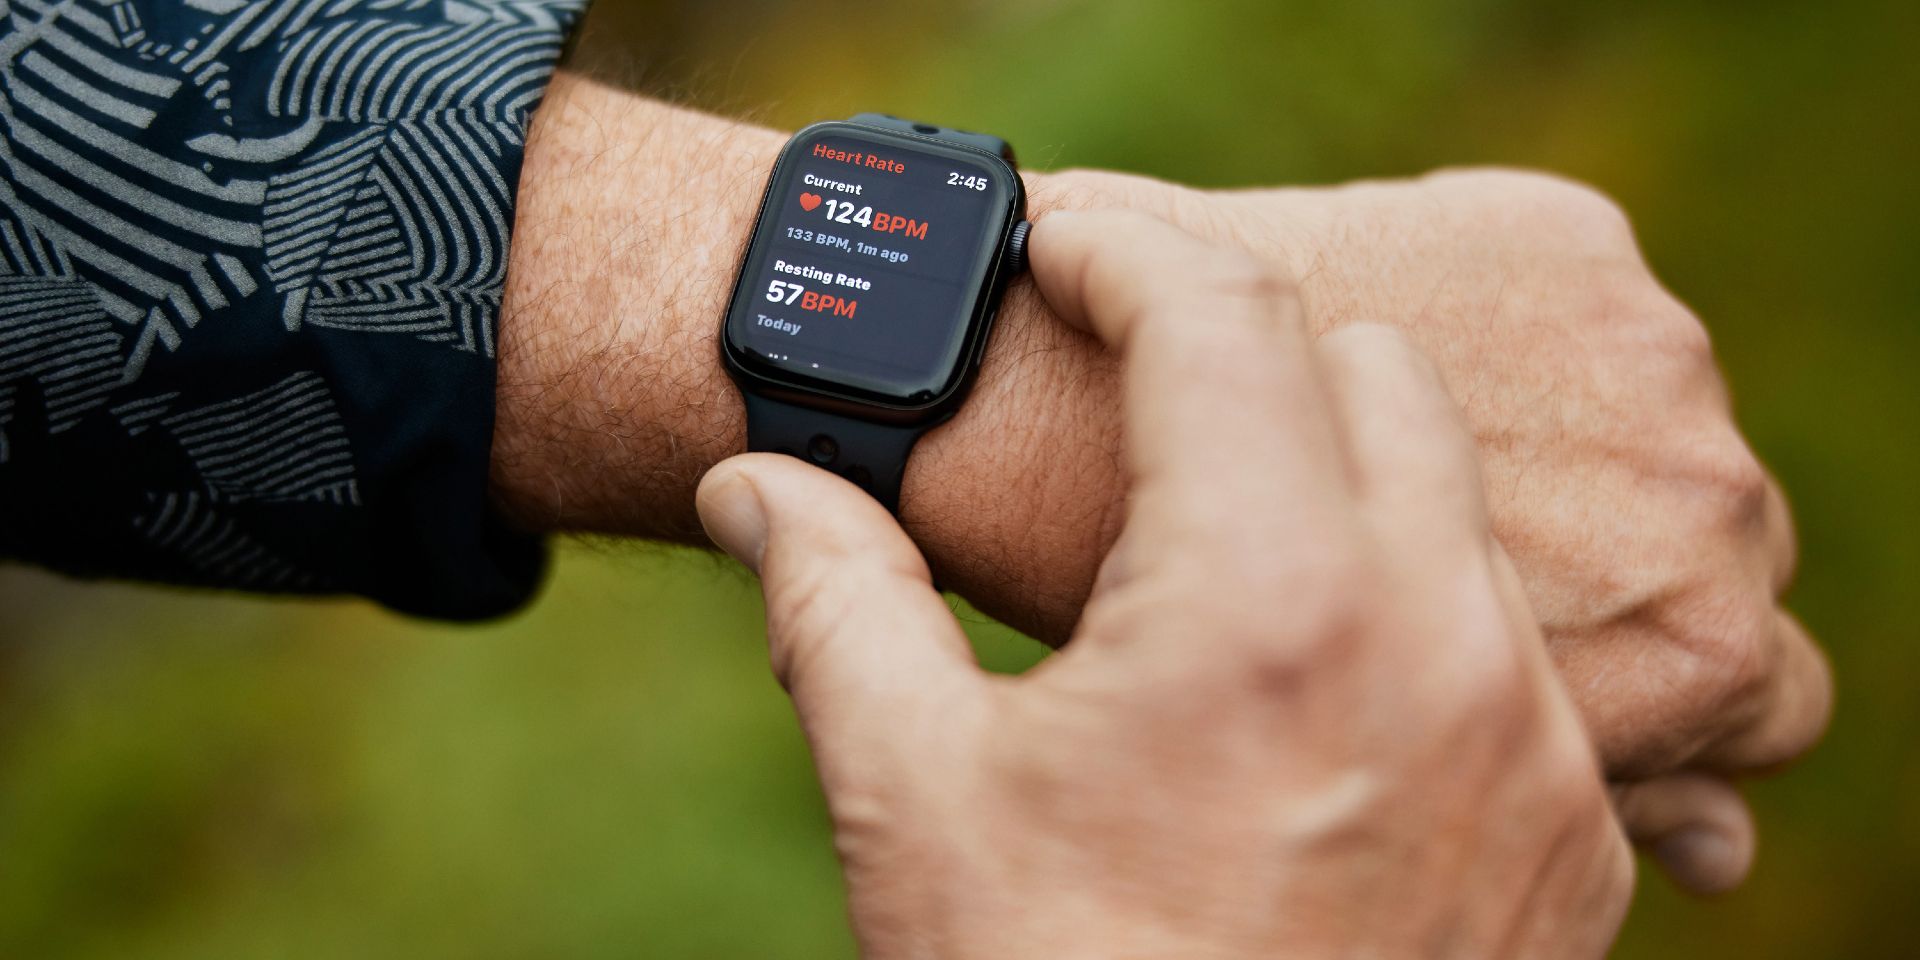 Apple Watch Accurate Enough For Remote Heart Monitoring Says Study